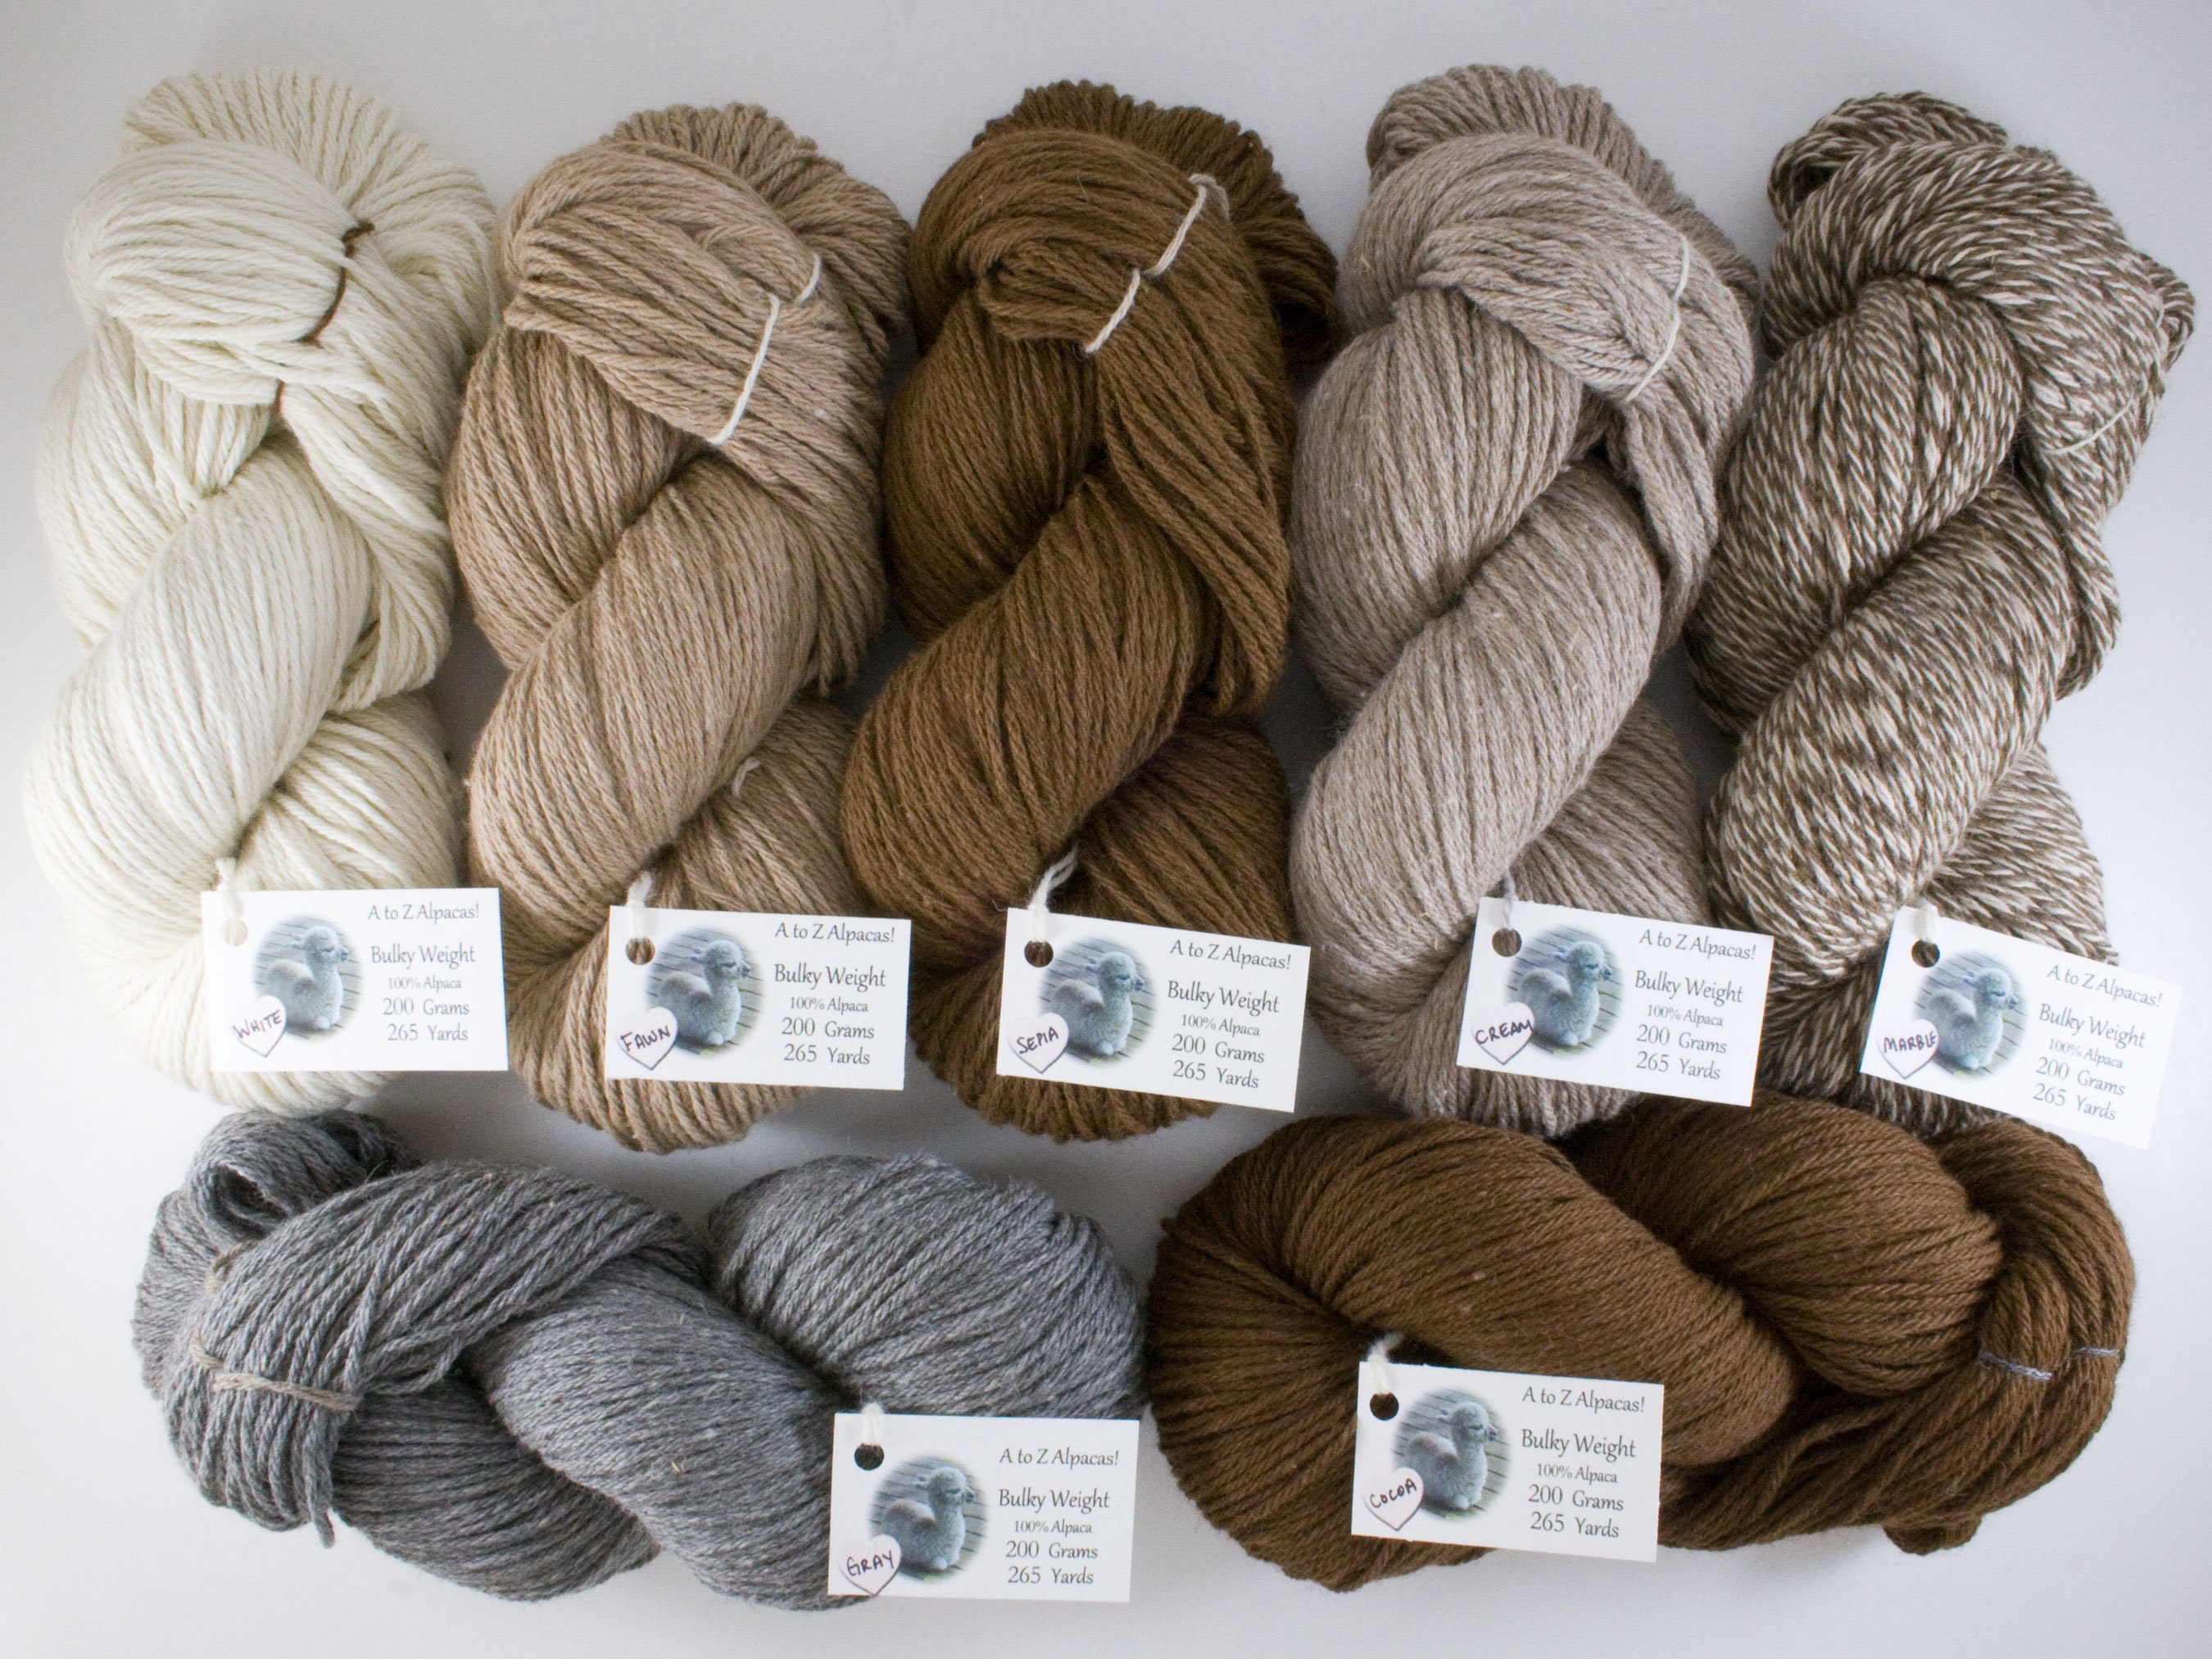 100% Alpaca Yarn Wool Set of 3 Skeins Fingering Lace Worsted Weight - Heavenly Soft and Perfect for Knitting and Crocheting (Beige, Fingering)